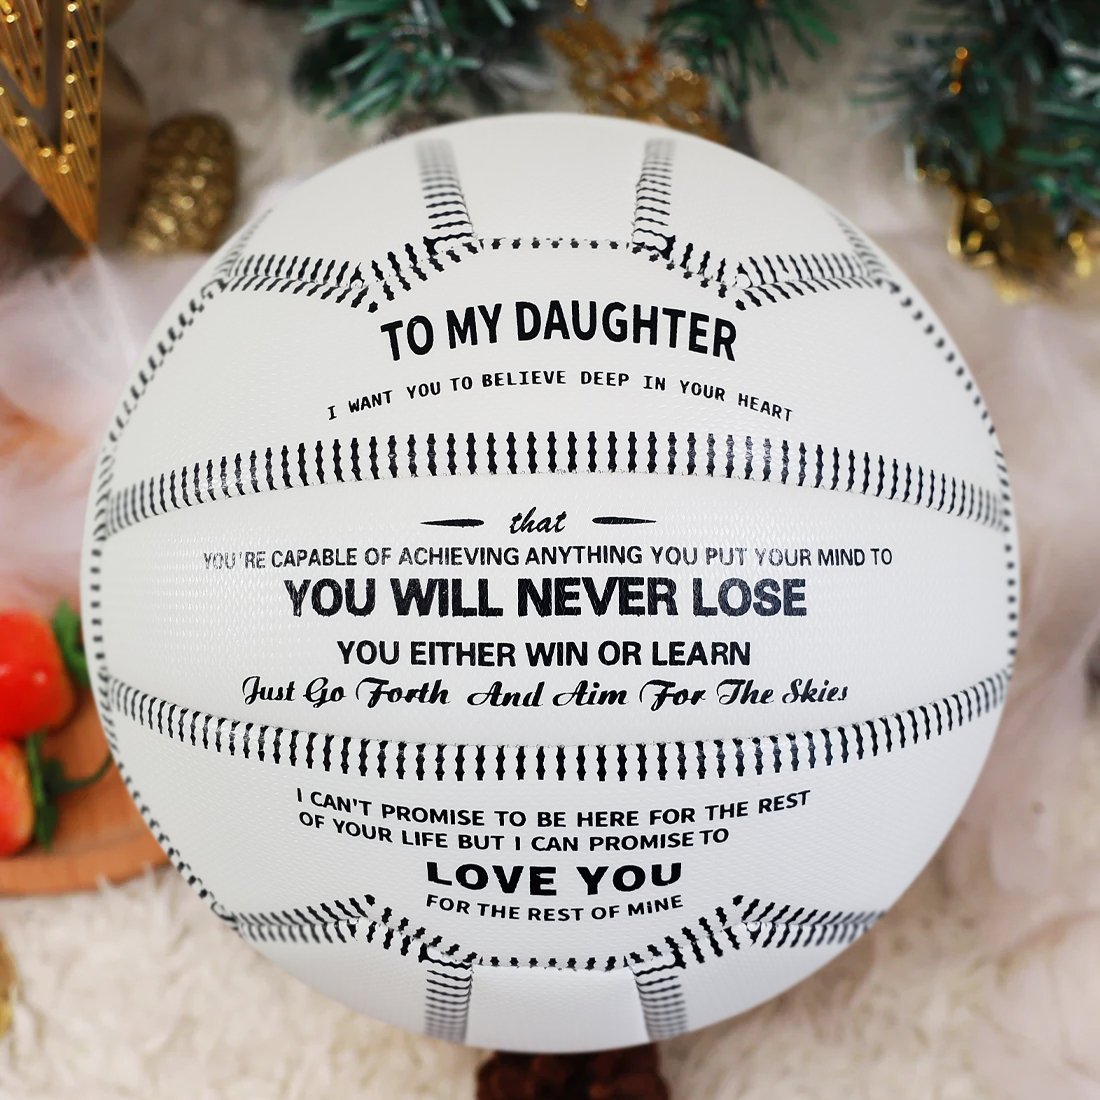 Personalized Printed Netball Gift To Daughter Netball for Daughter Sport Birthday Sport College Graduation Christmas Netball Gift Hand Stitch - Family Watchs